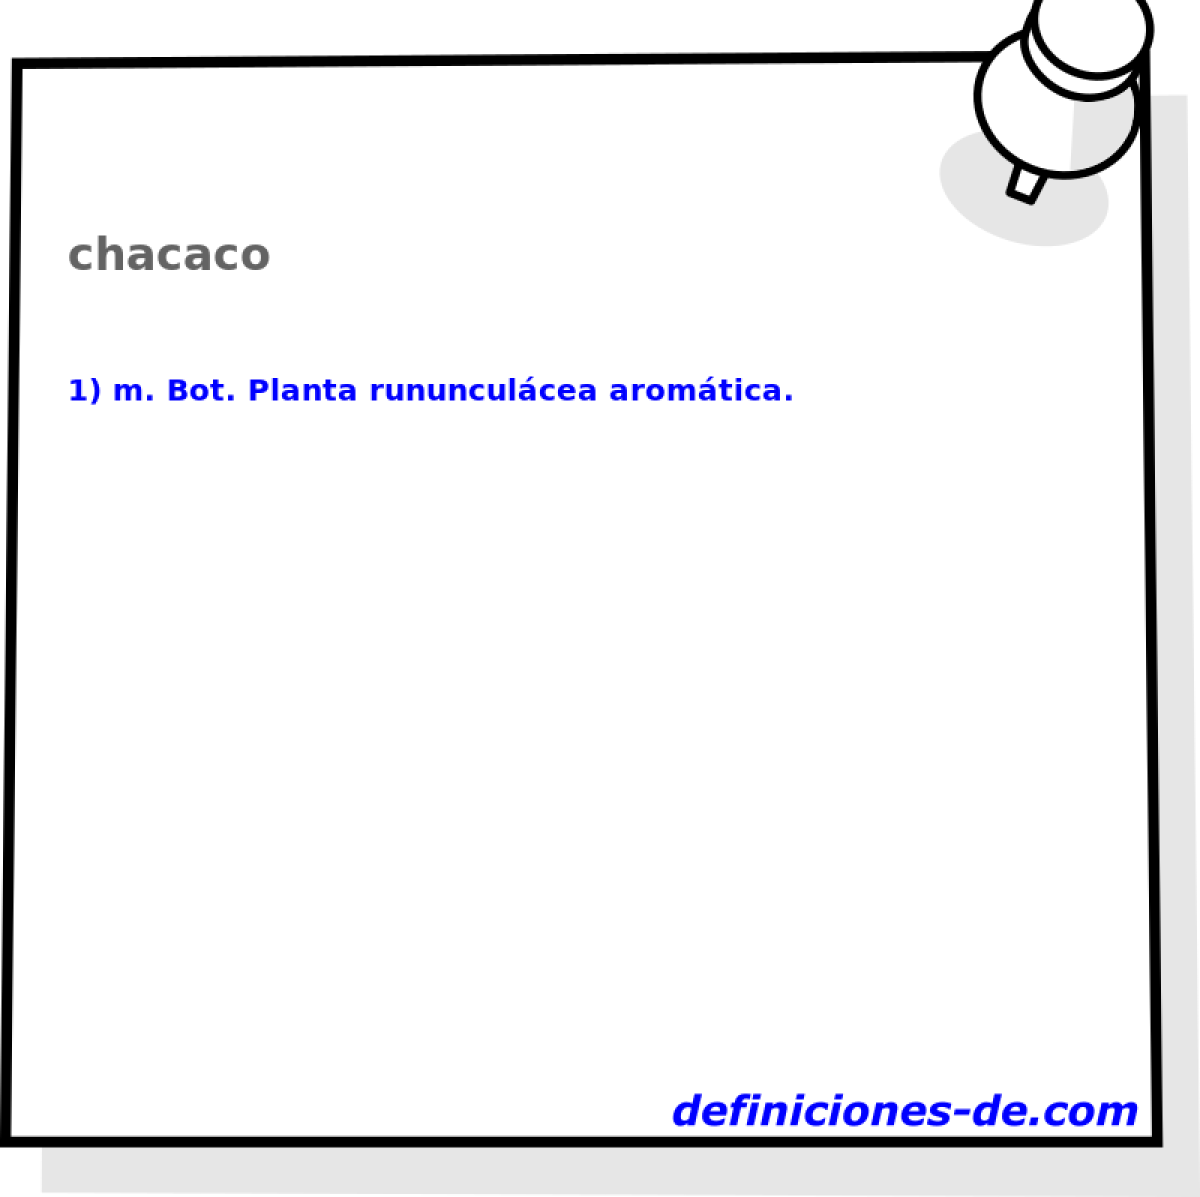 chacaco 